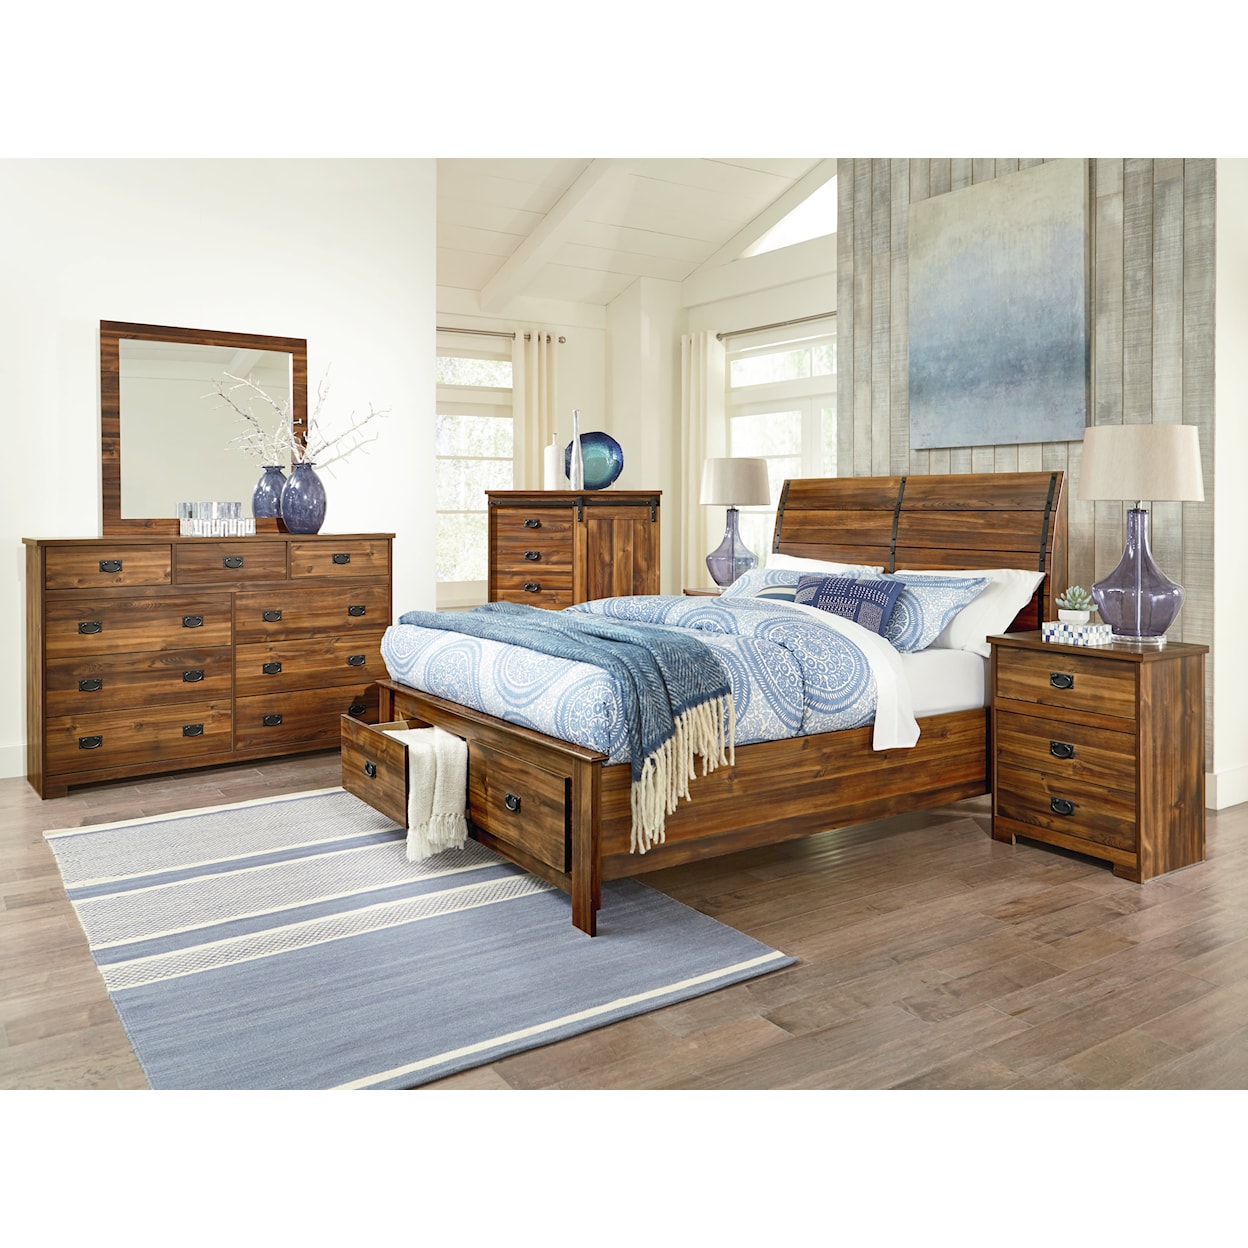 Perdue Rustic Charm RUSTIC CHARM KING BED |